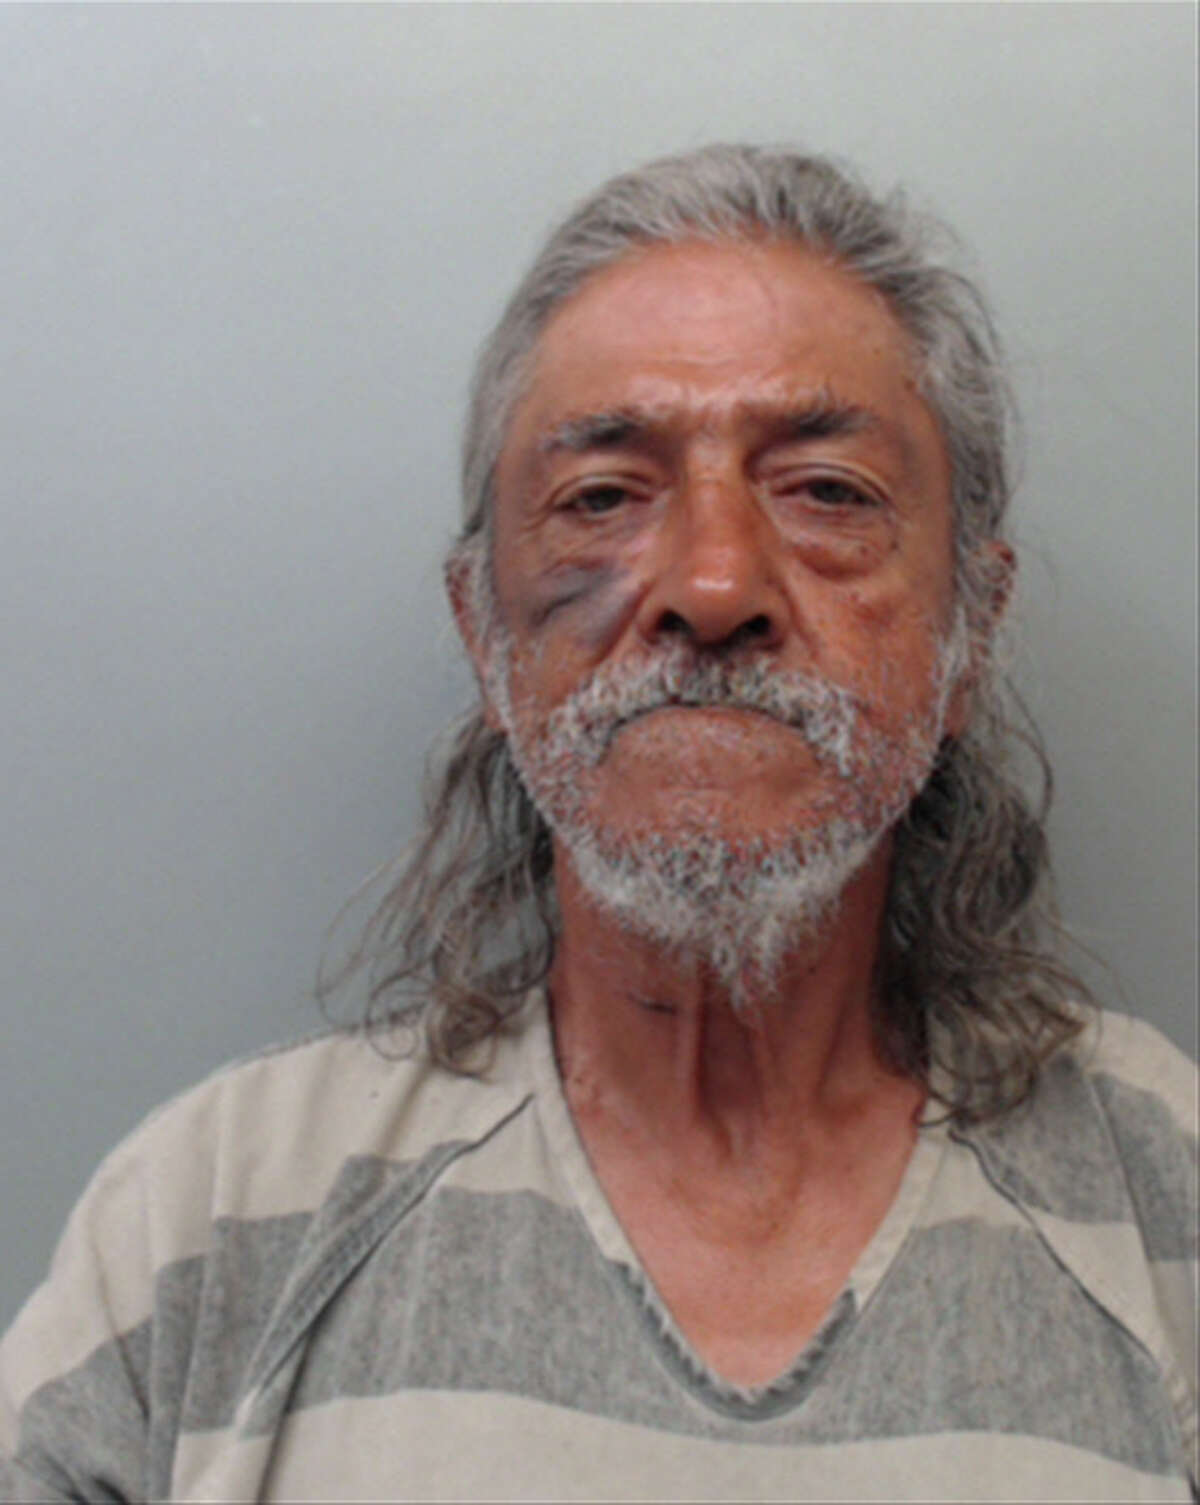 Francisco Javier Aranda, 67, was charged with aggravated assault with a deadly weapon.